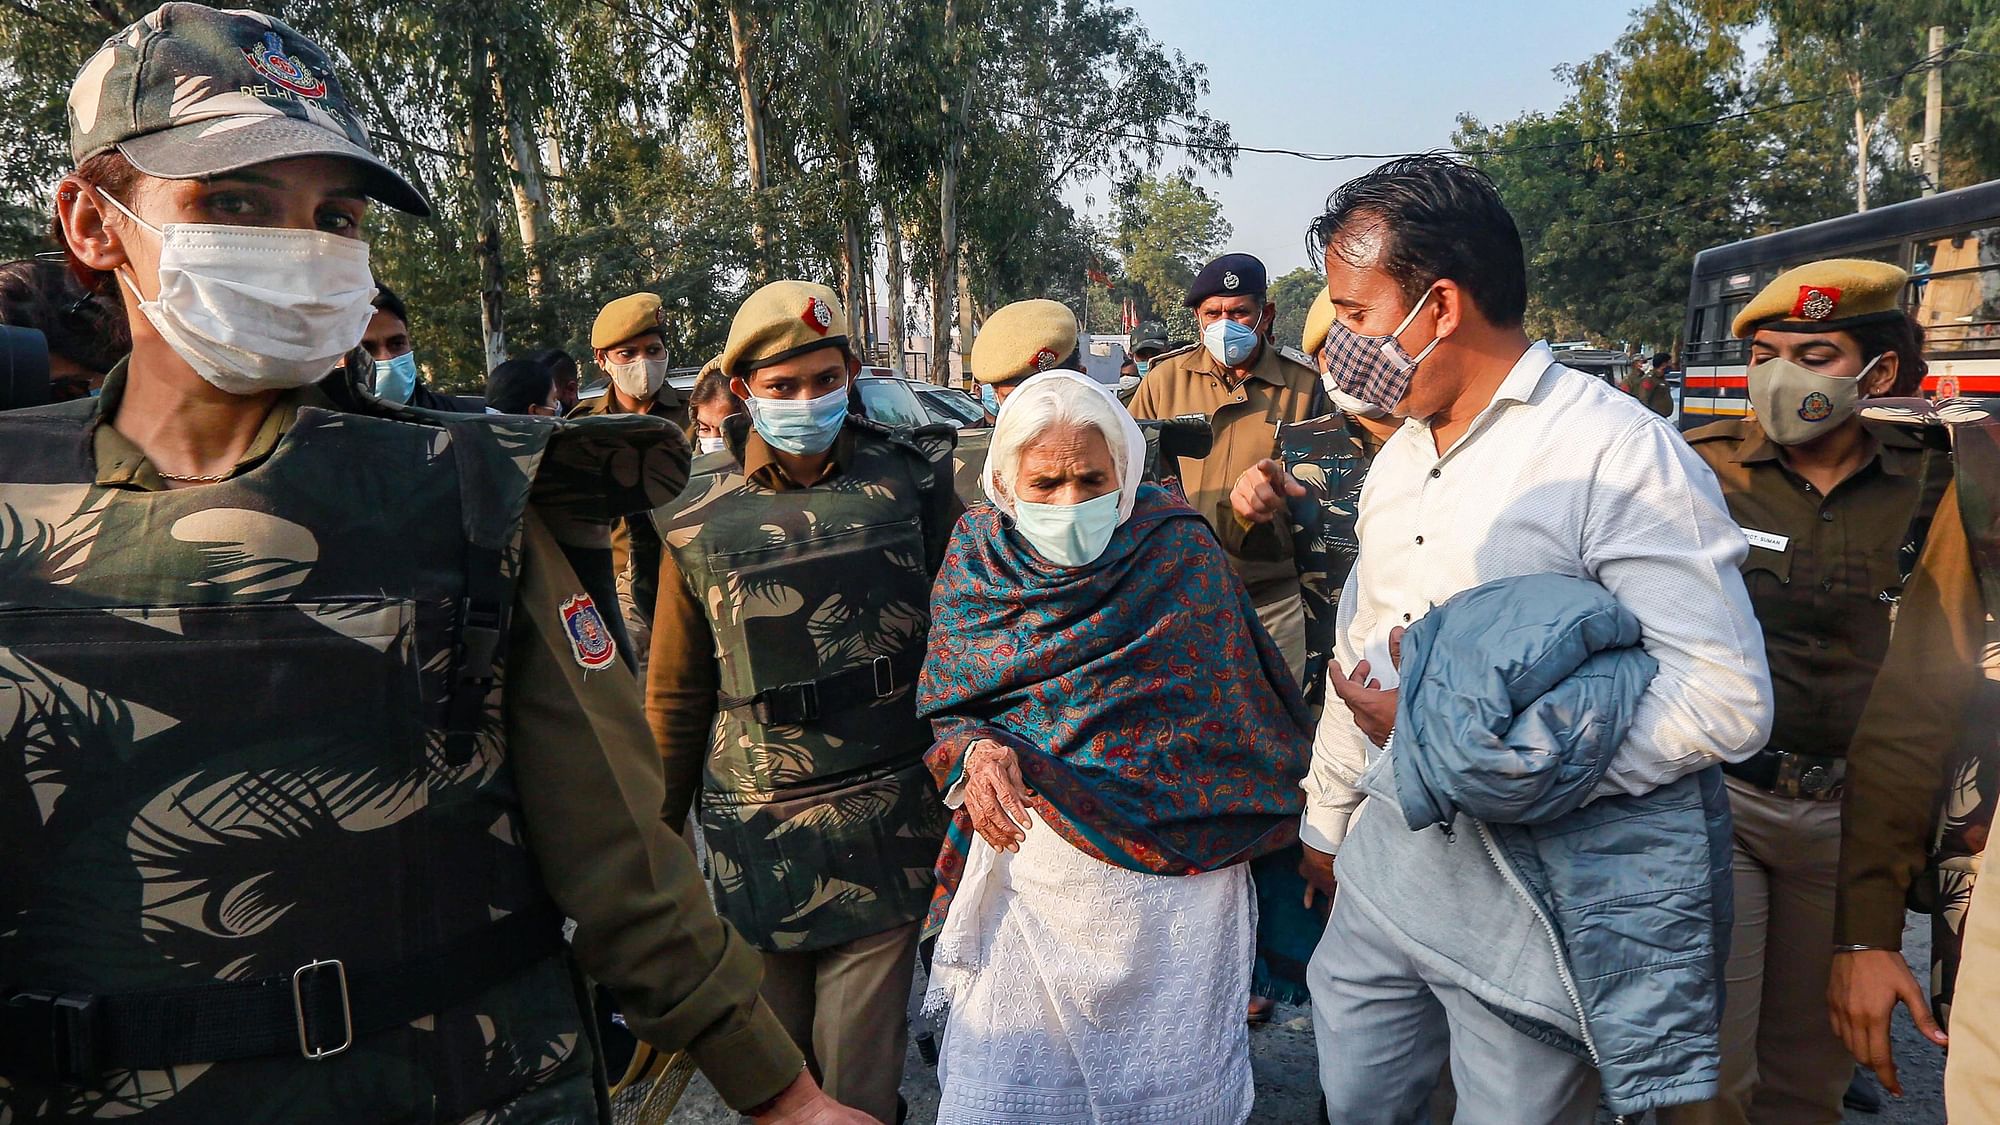 82-year-old Bilkis Bano, popularly known as Shaheen Bagh’s Dadi, returns after being prevented from joining farmers protesting at Singhu border.